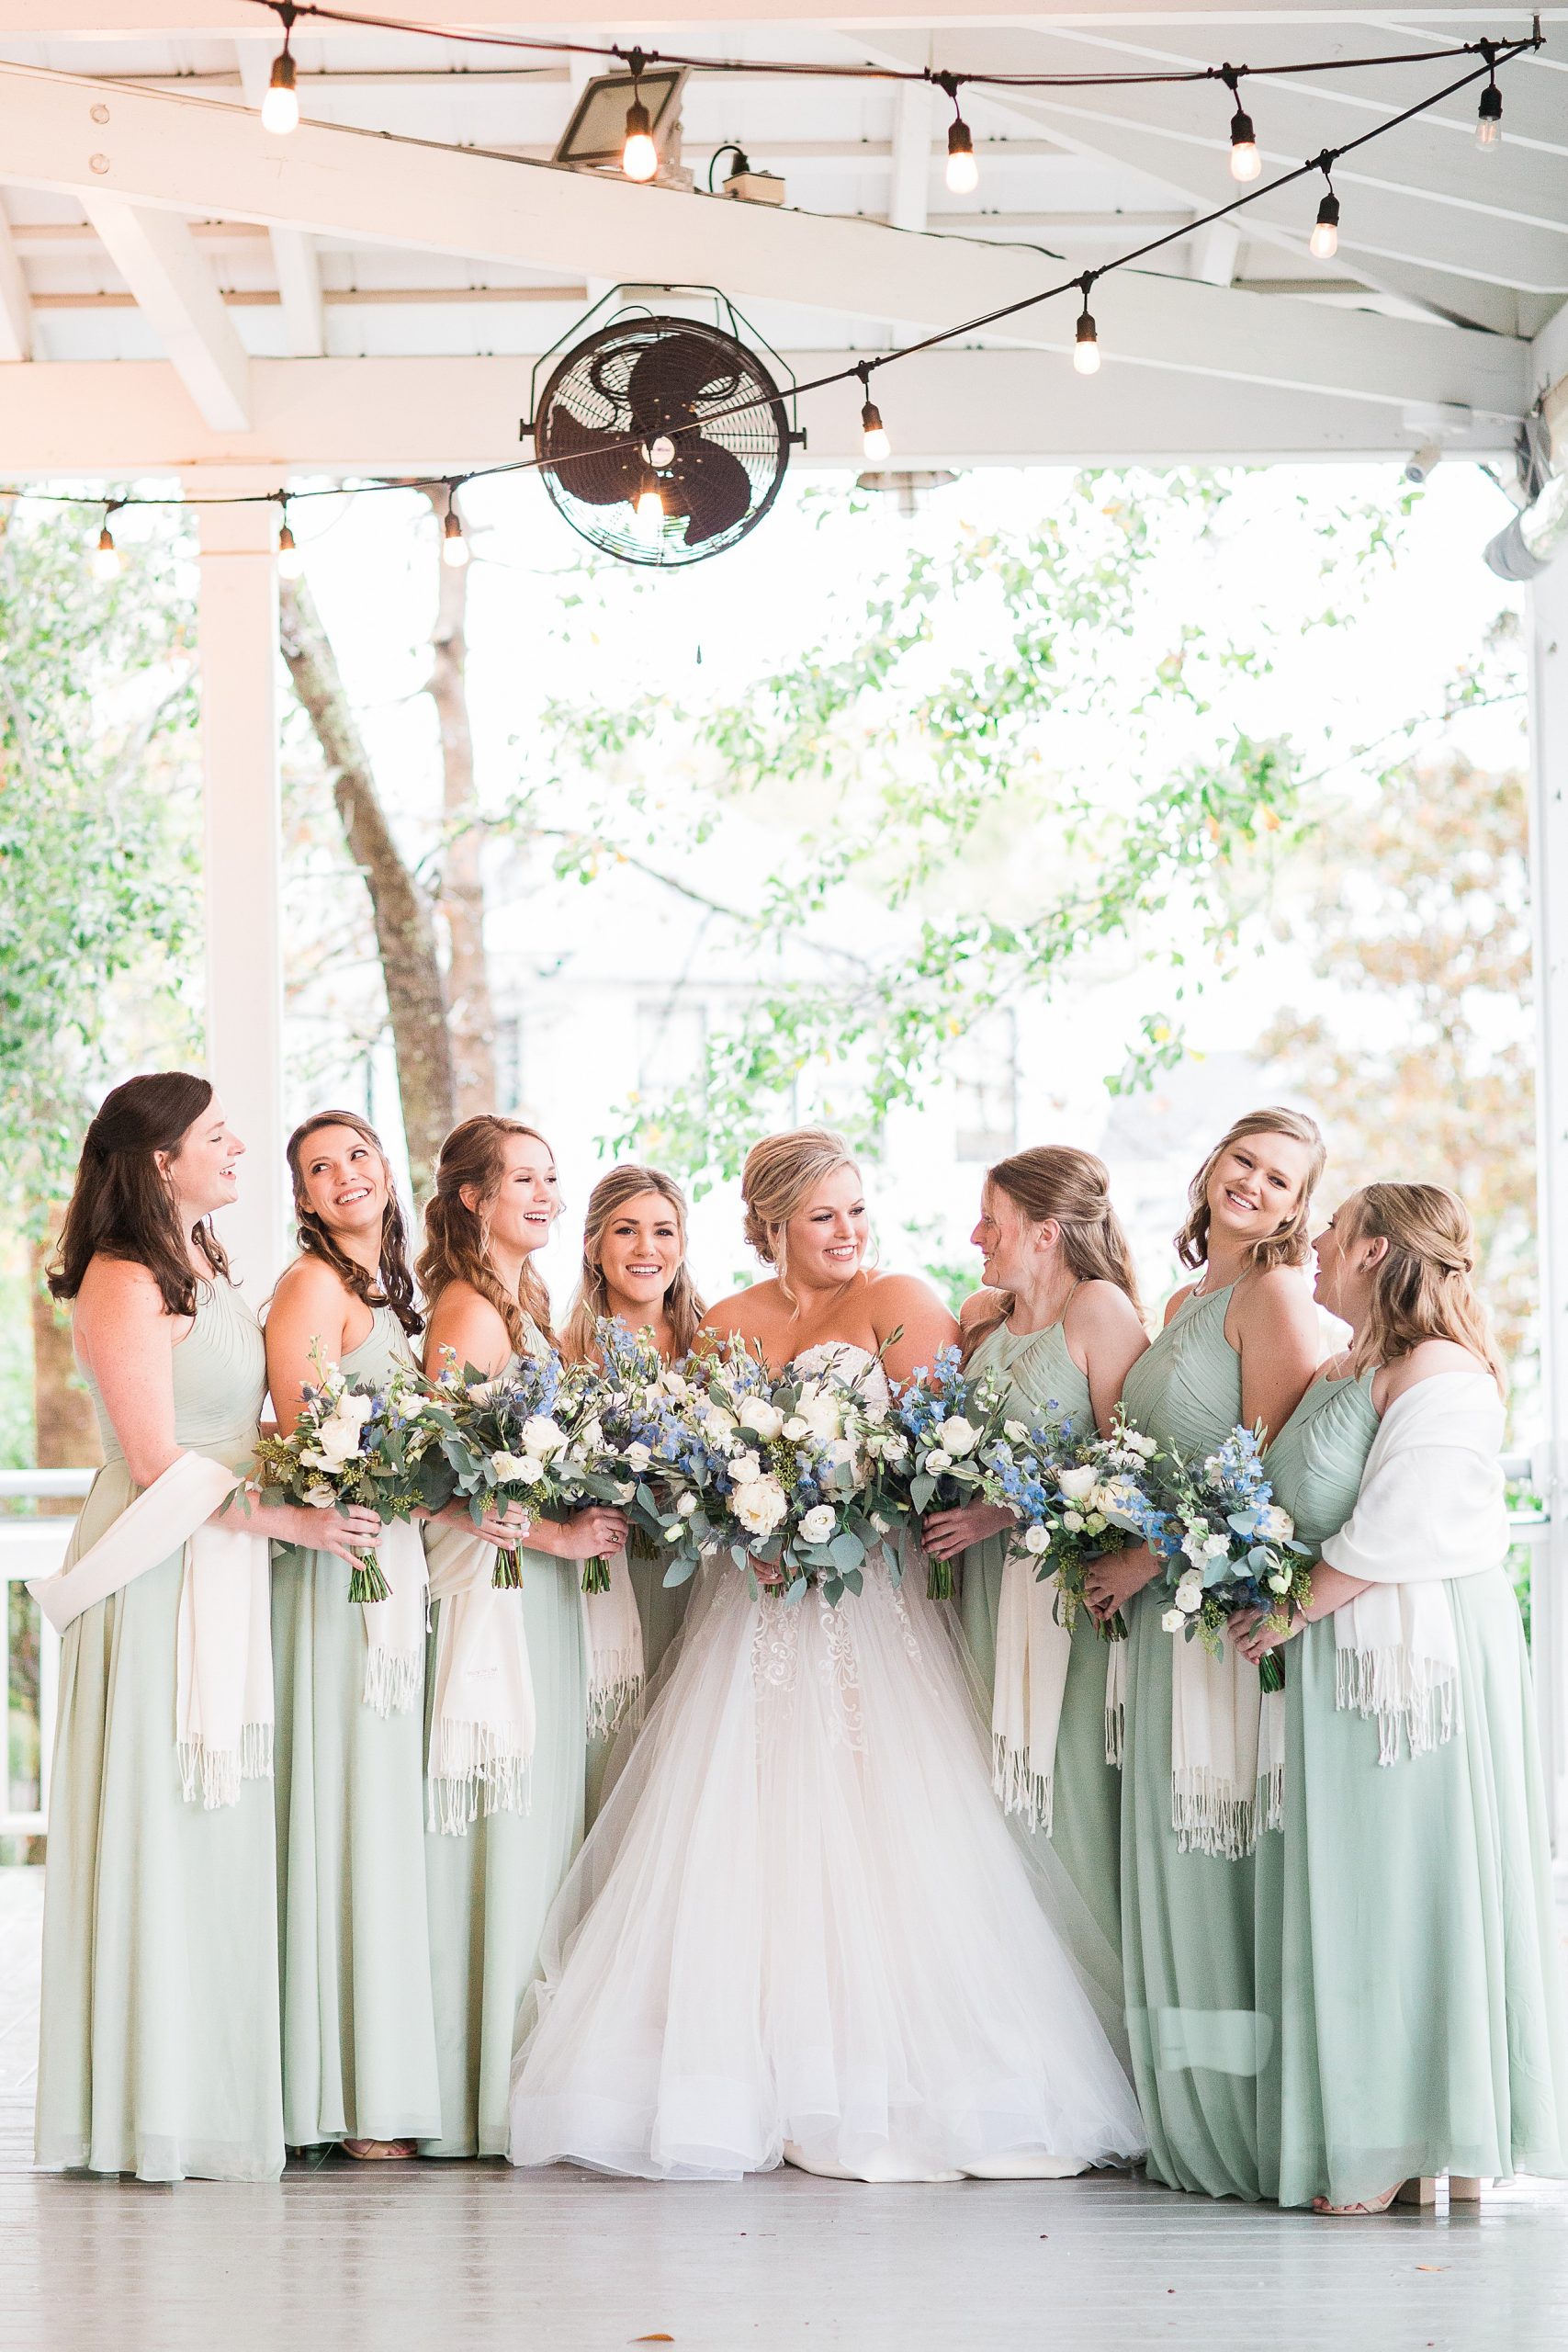 Bride with Maid of Honor and Bridesmaids